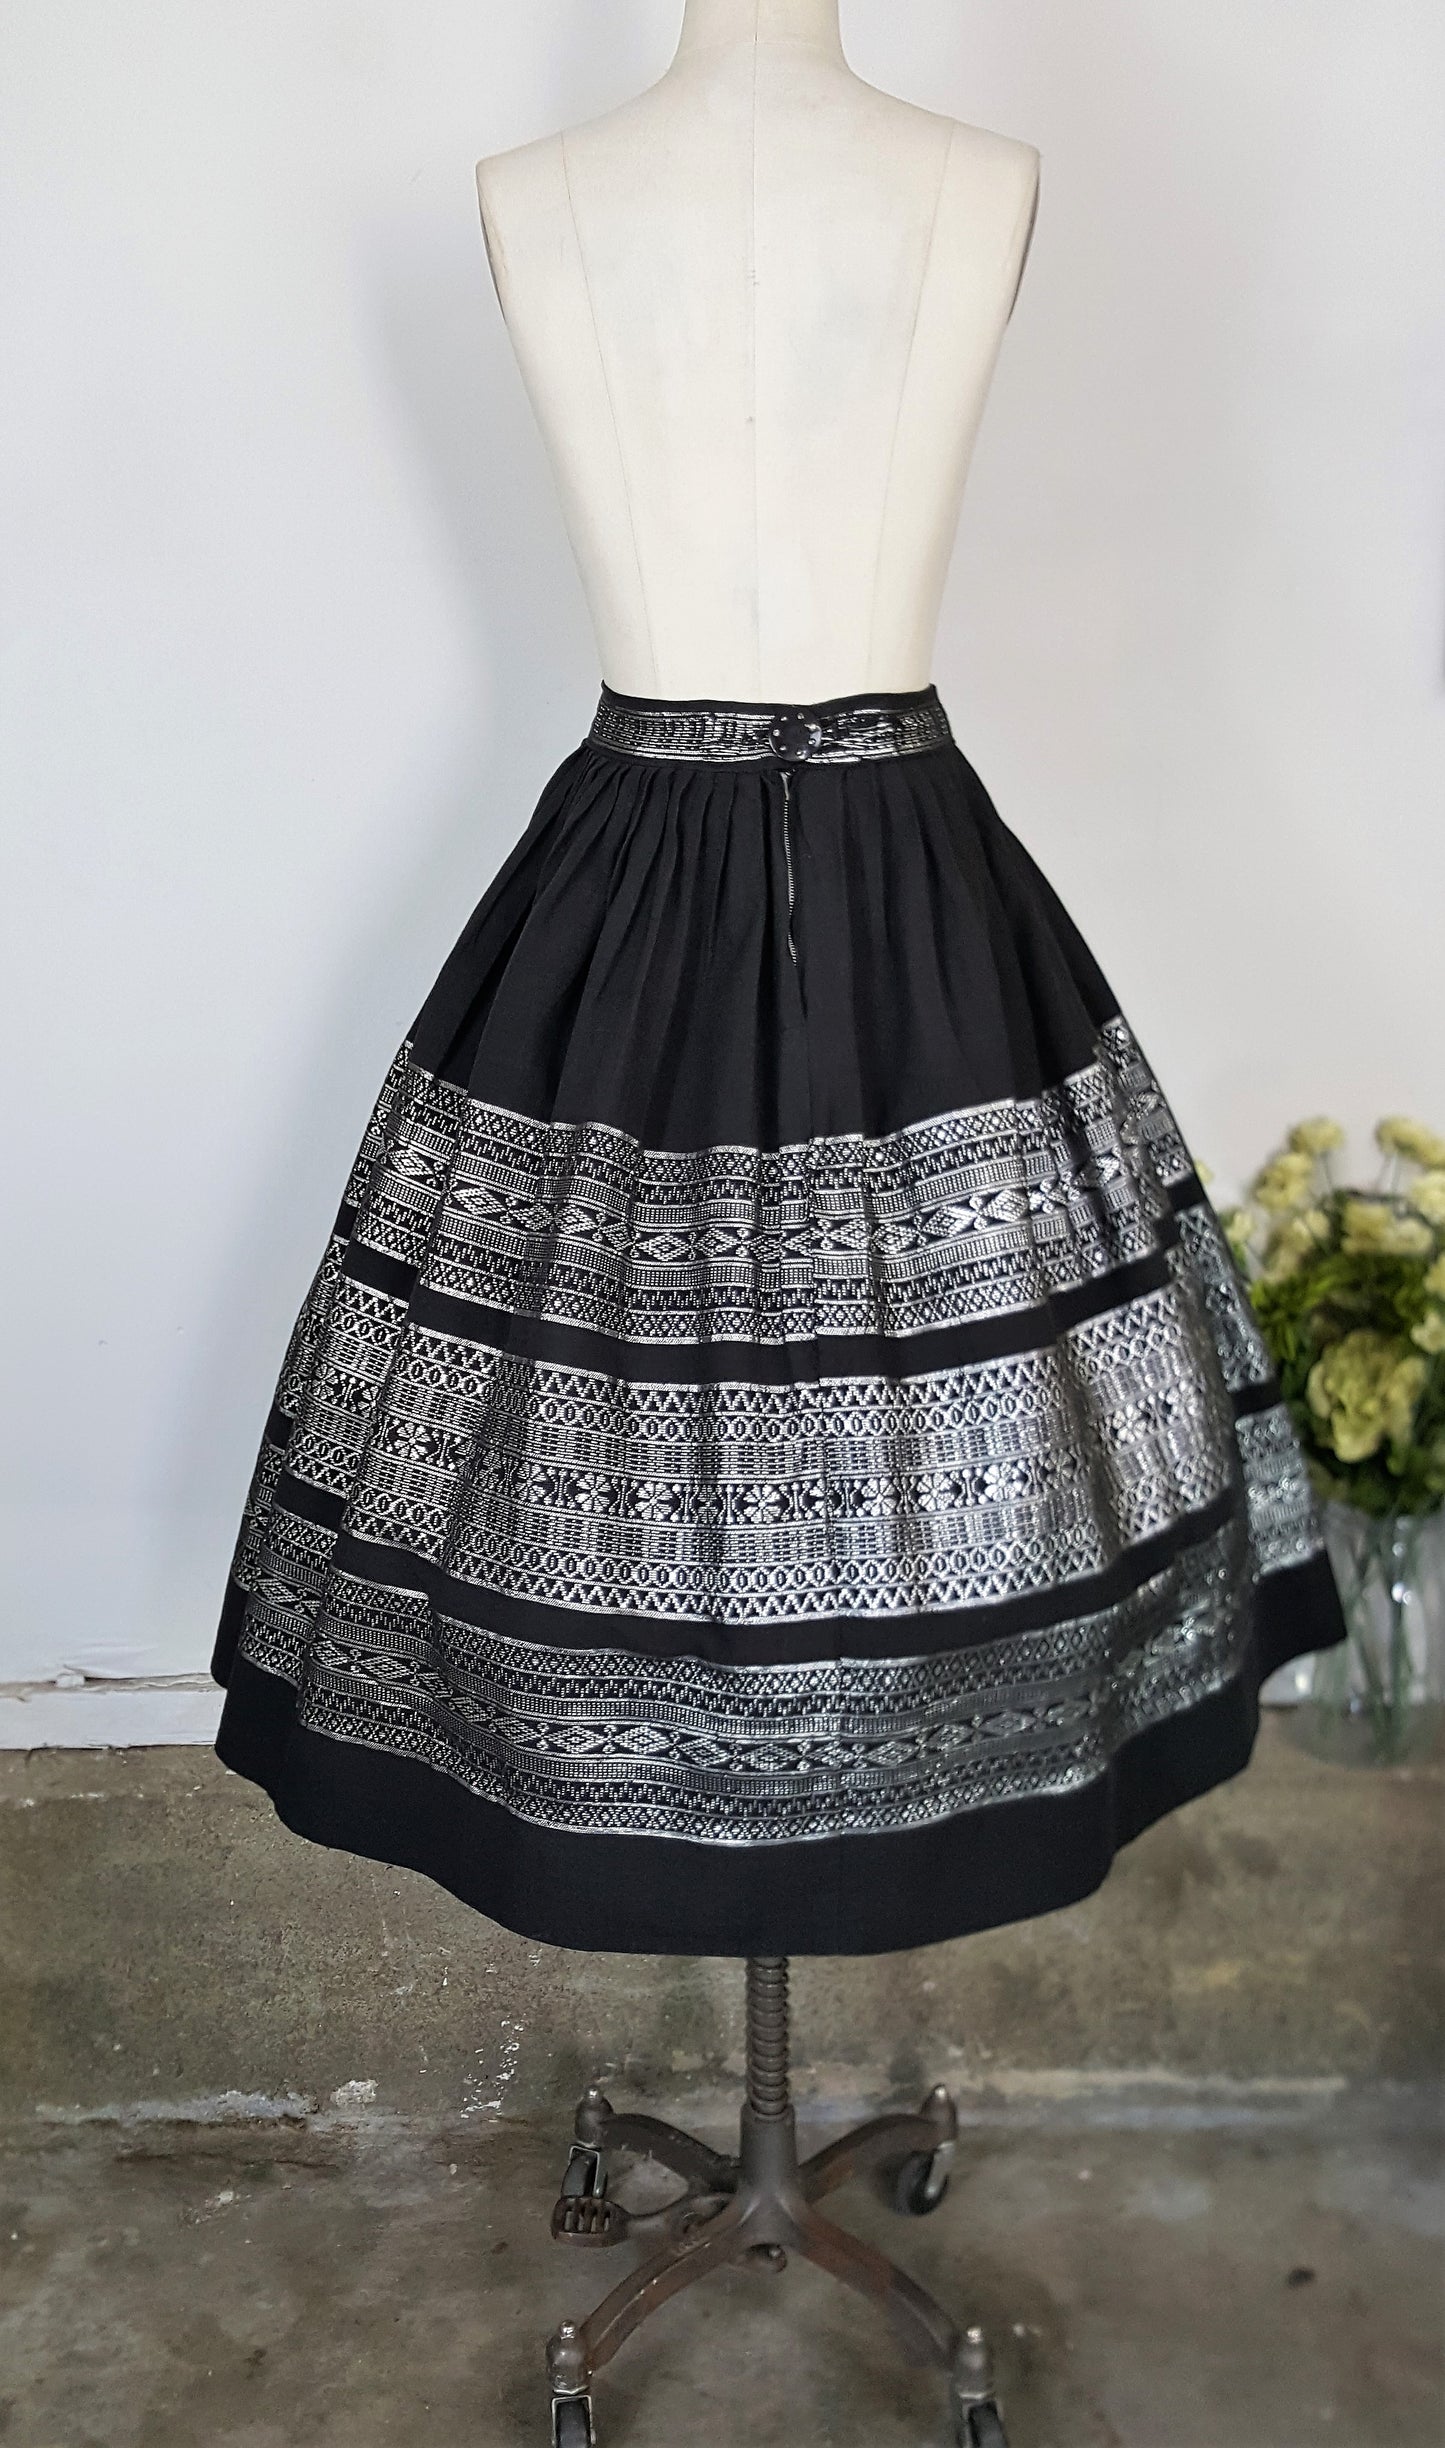 Vintage 1950s Black Full Circle Skirt With Silver Thread Embroidery